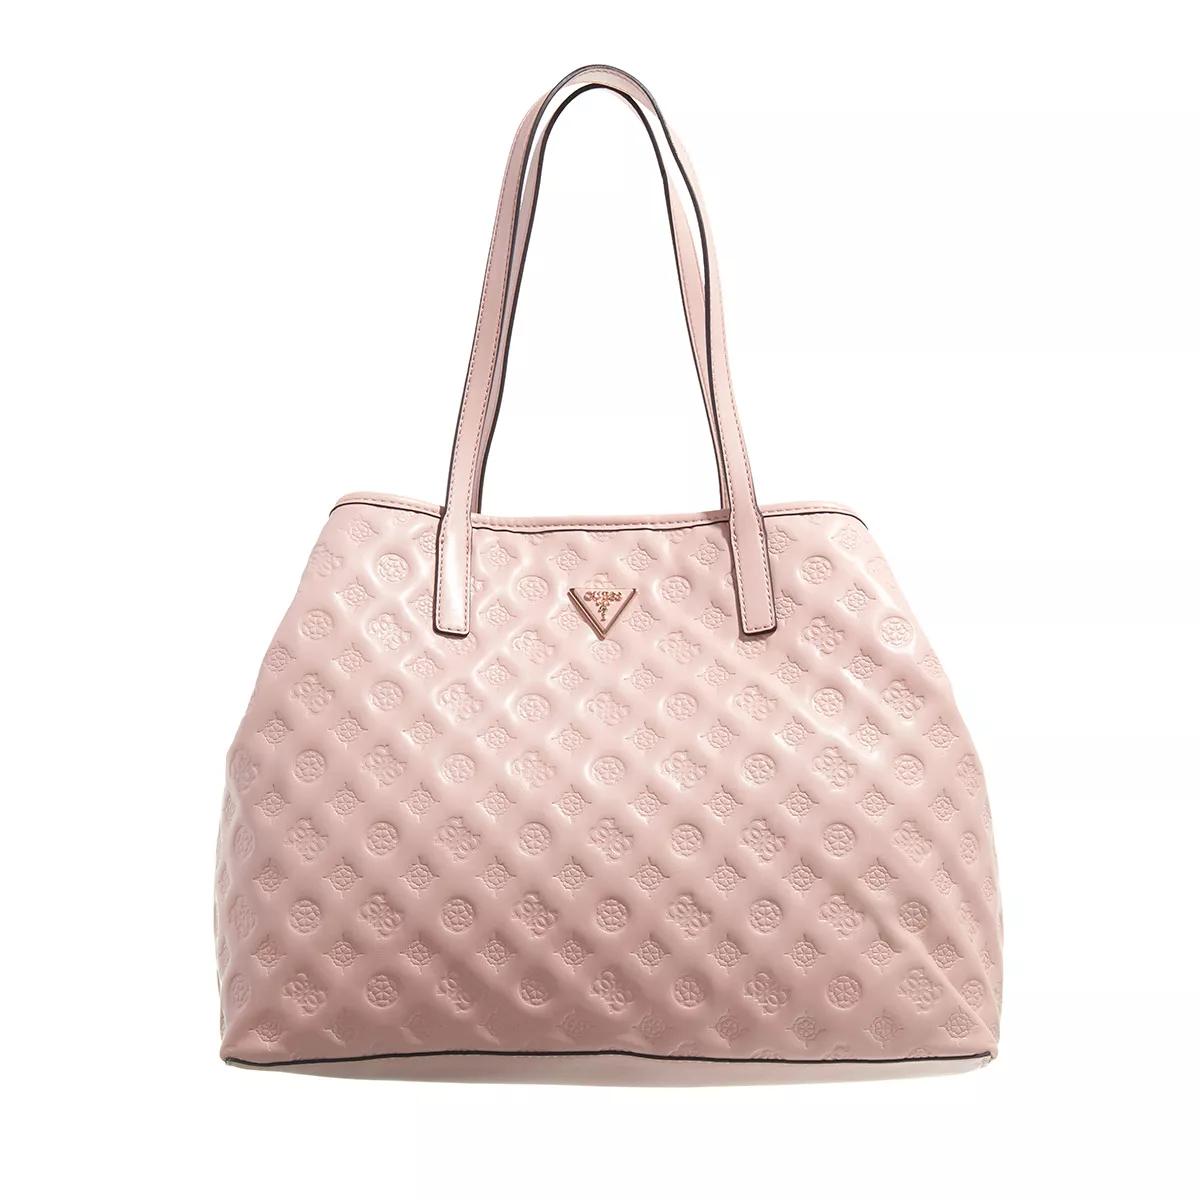 Guess Vikky Large Tote Pale Rose, Tote